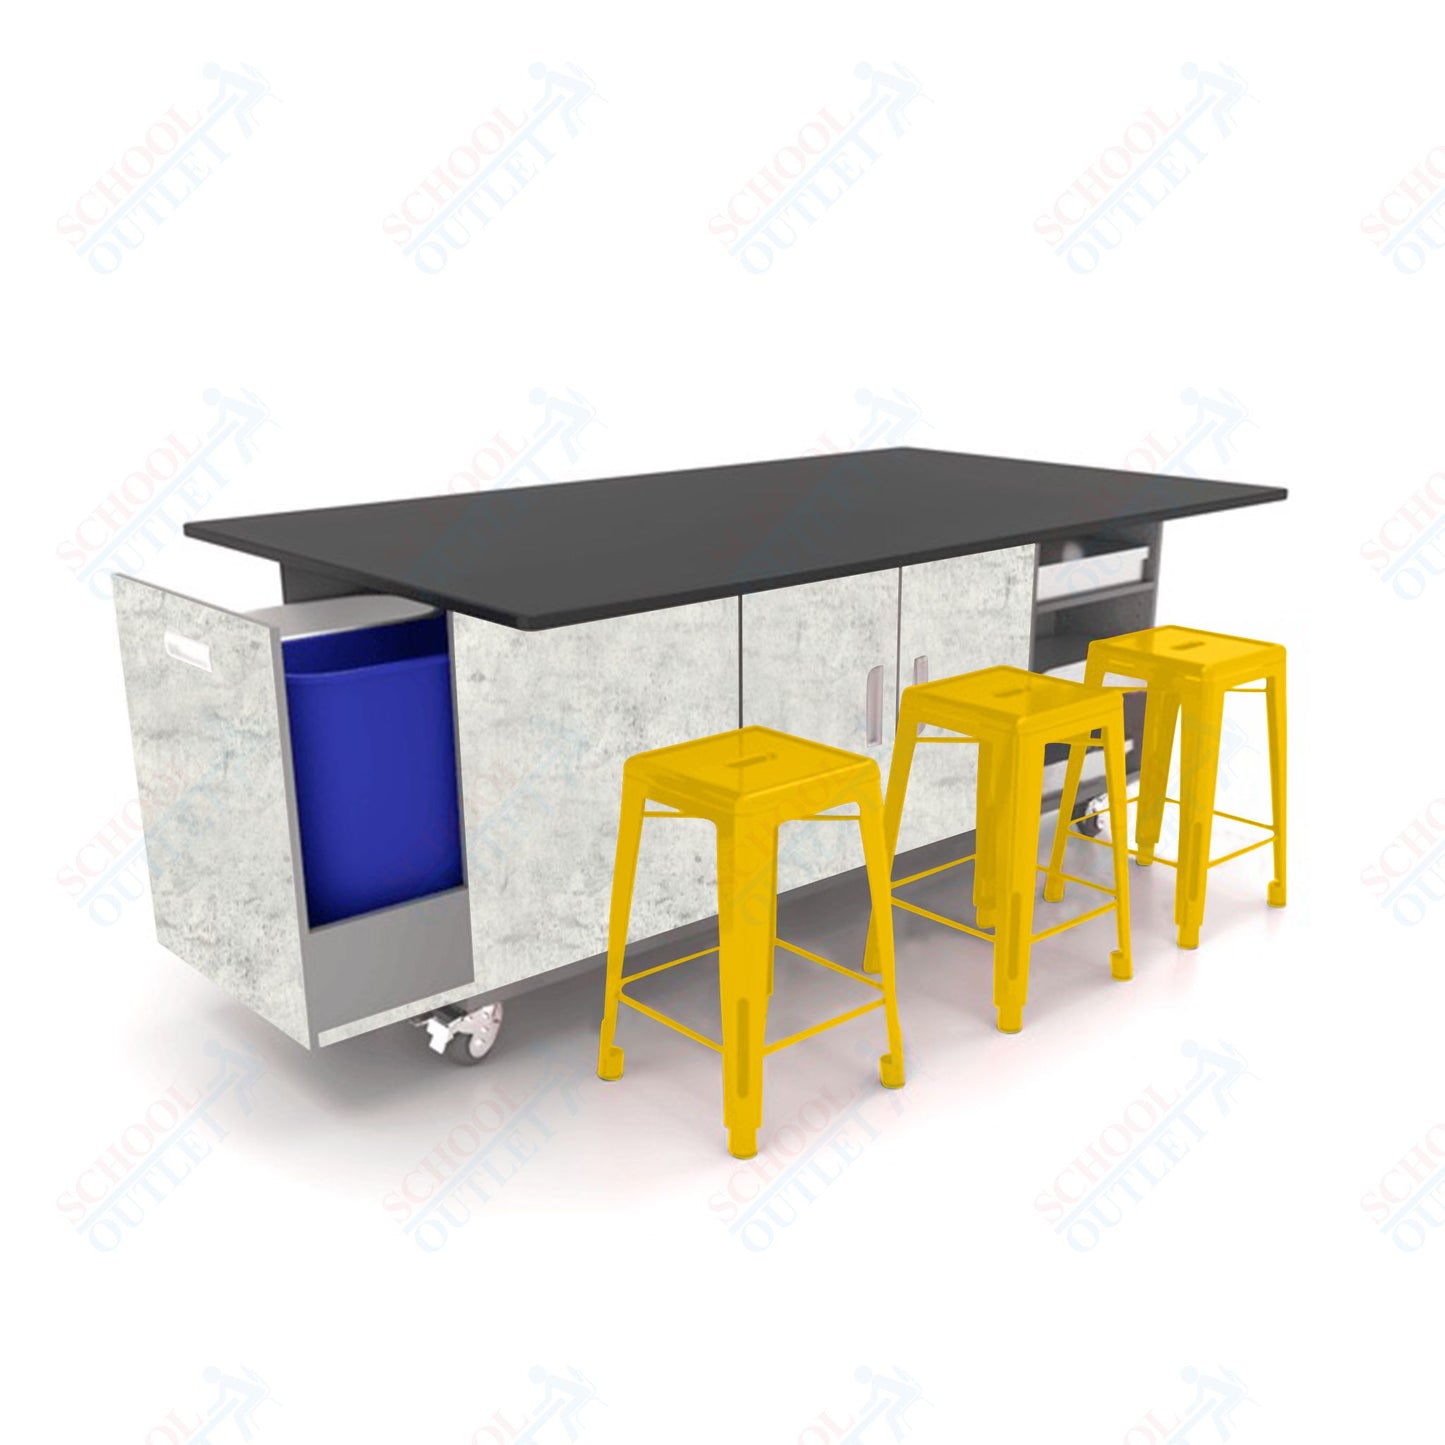 CEF ED Original Table 36"H Chemical Resistant Top, Laminate Base with  6 Stools, Storage Bins, Trash Bins, and Electrical Outlets Included.